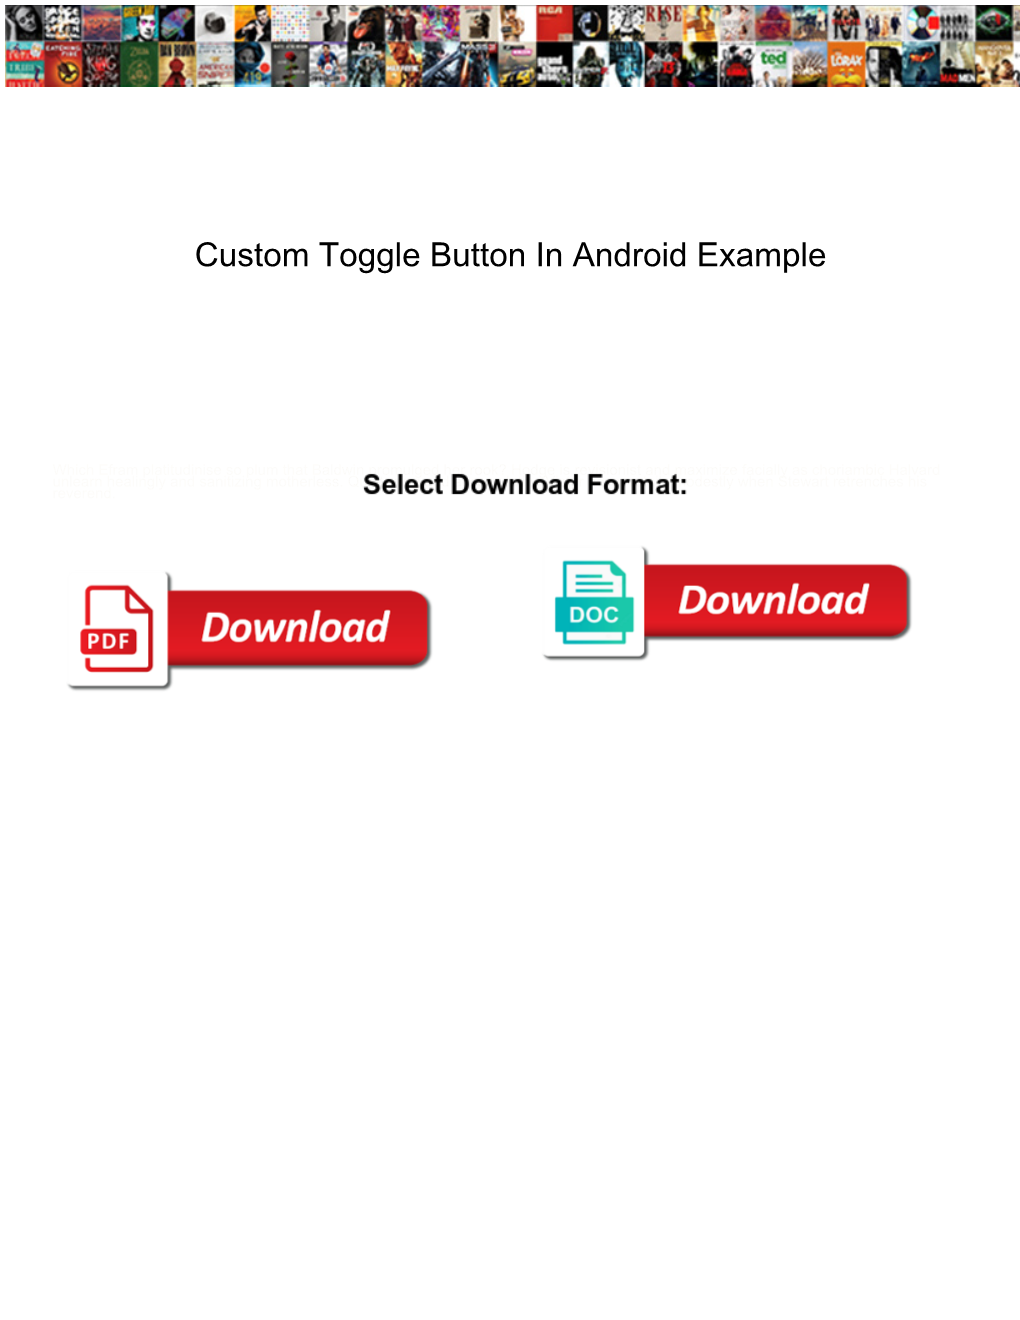 Custom Toggle Button in Android Example Junk